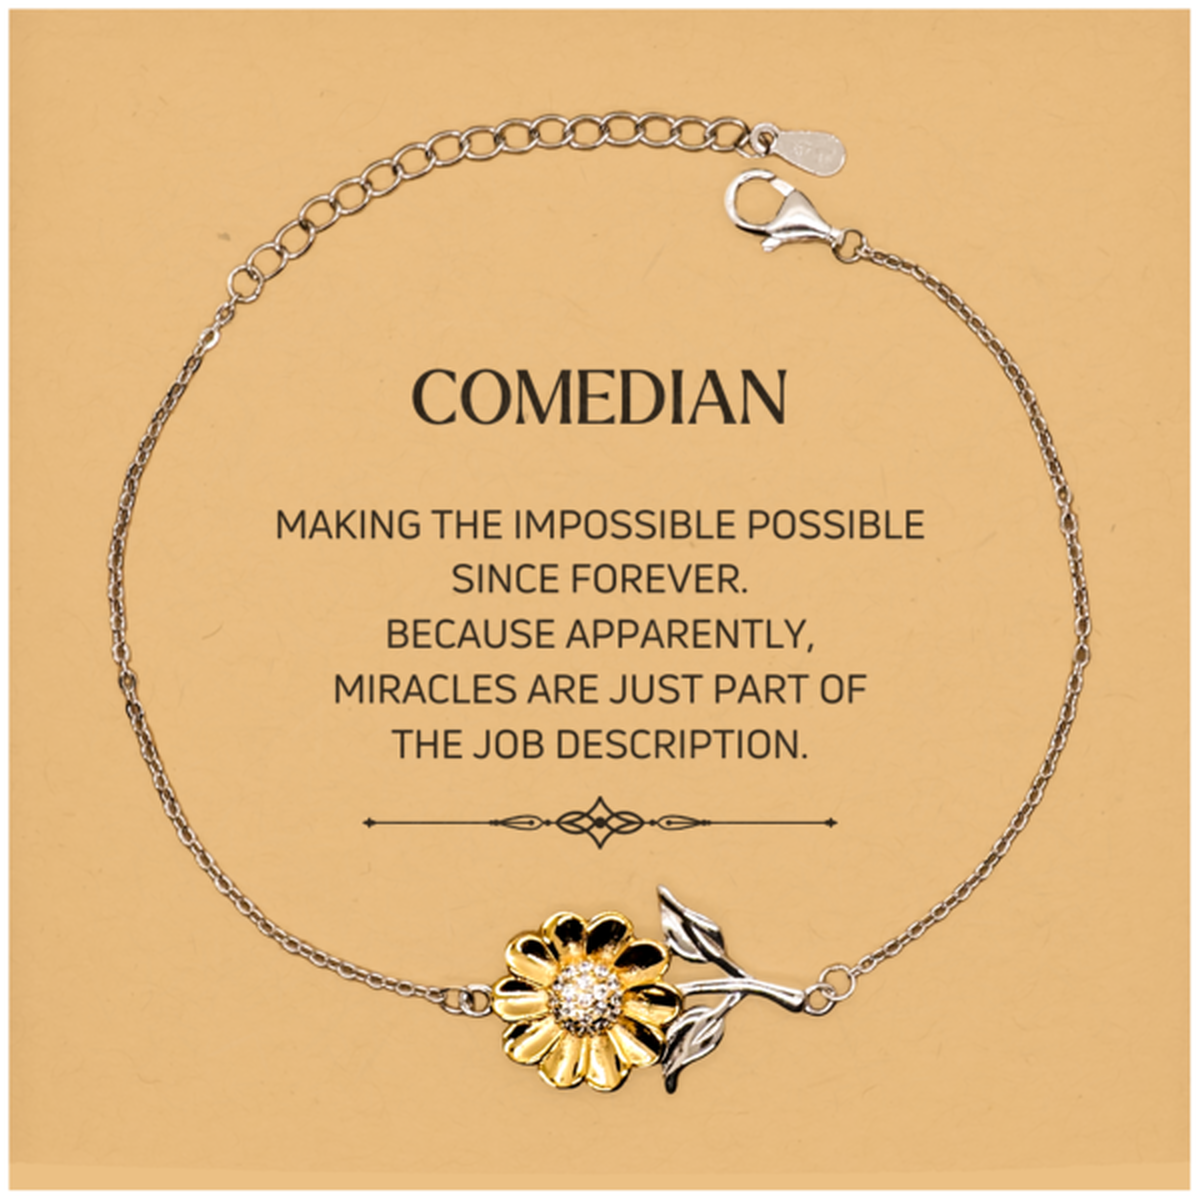 Funny Comedian Gifts, Miracles are just part of the job description, Inspirational Birthday Christmas Sunflower Bracelet For Comedian, Men, Women, Coworkers, Friends, Boss